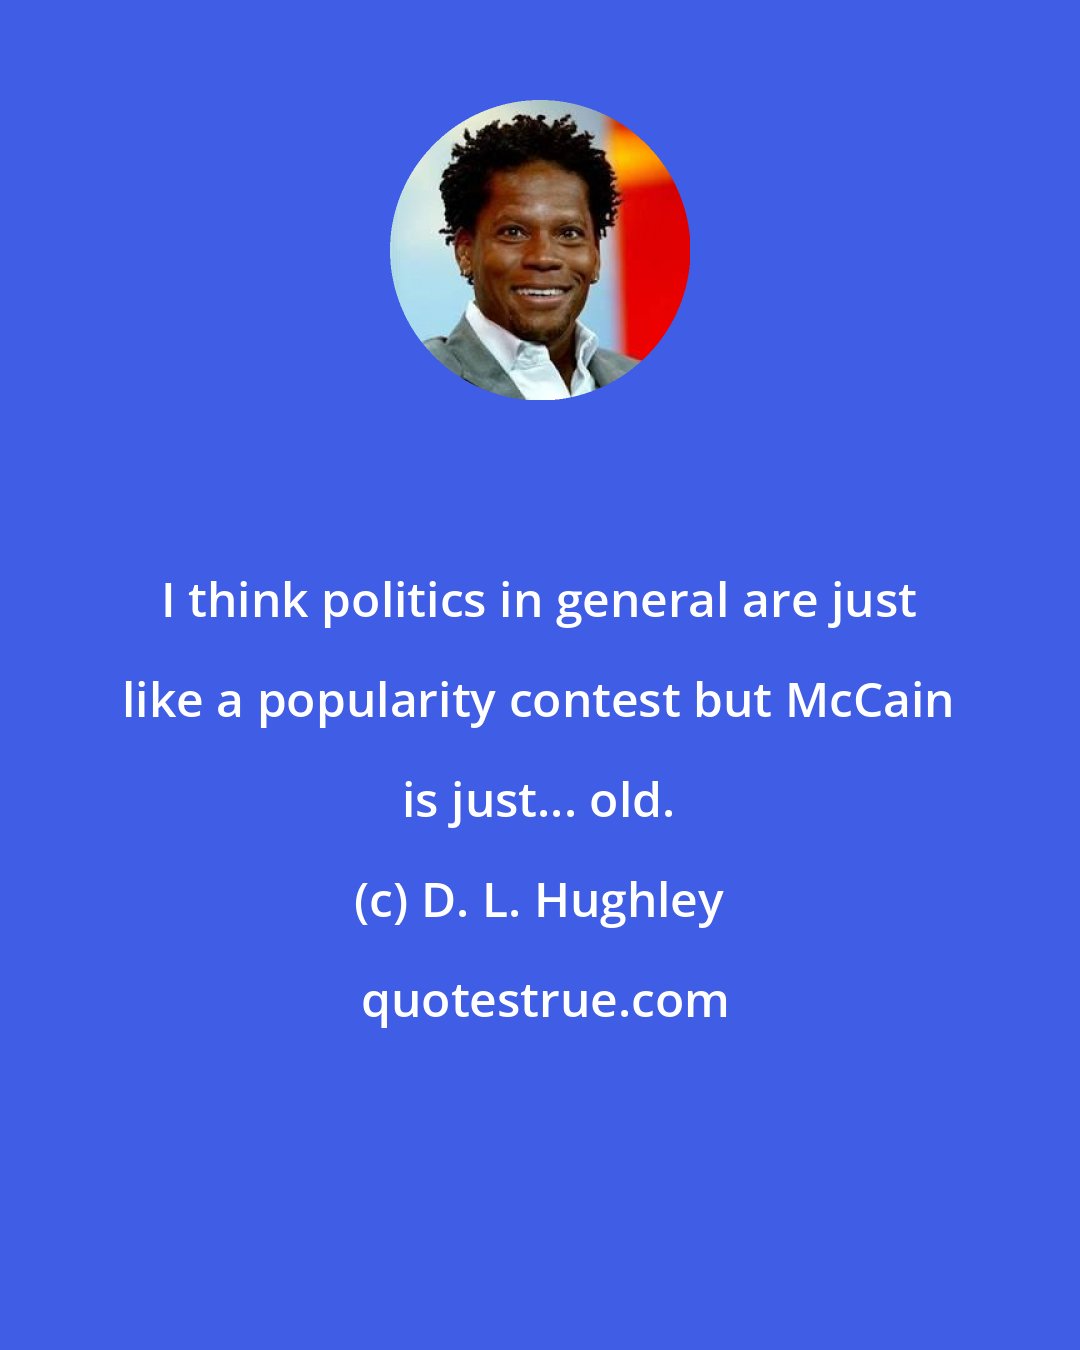 D. L. Hughley: I think politics in general are just like a popularity contest but McCain is just... old.